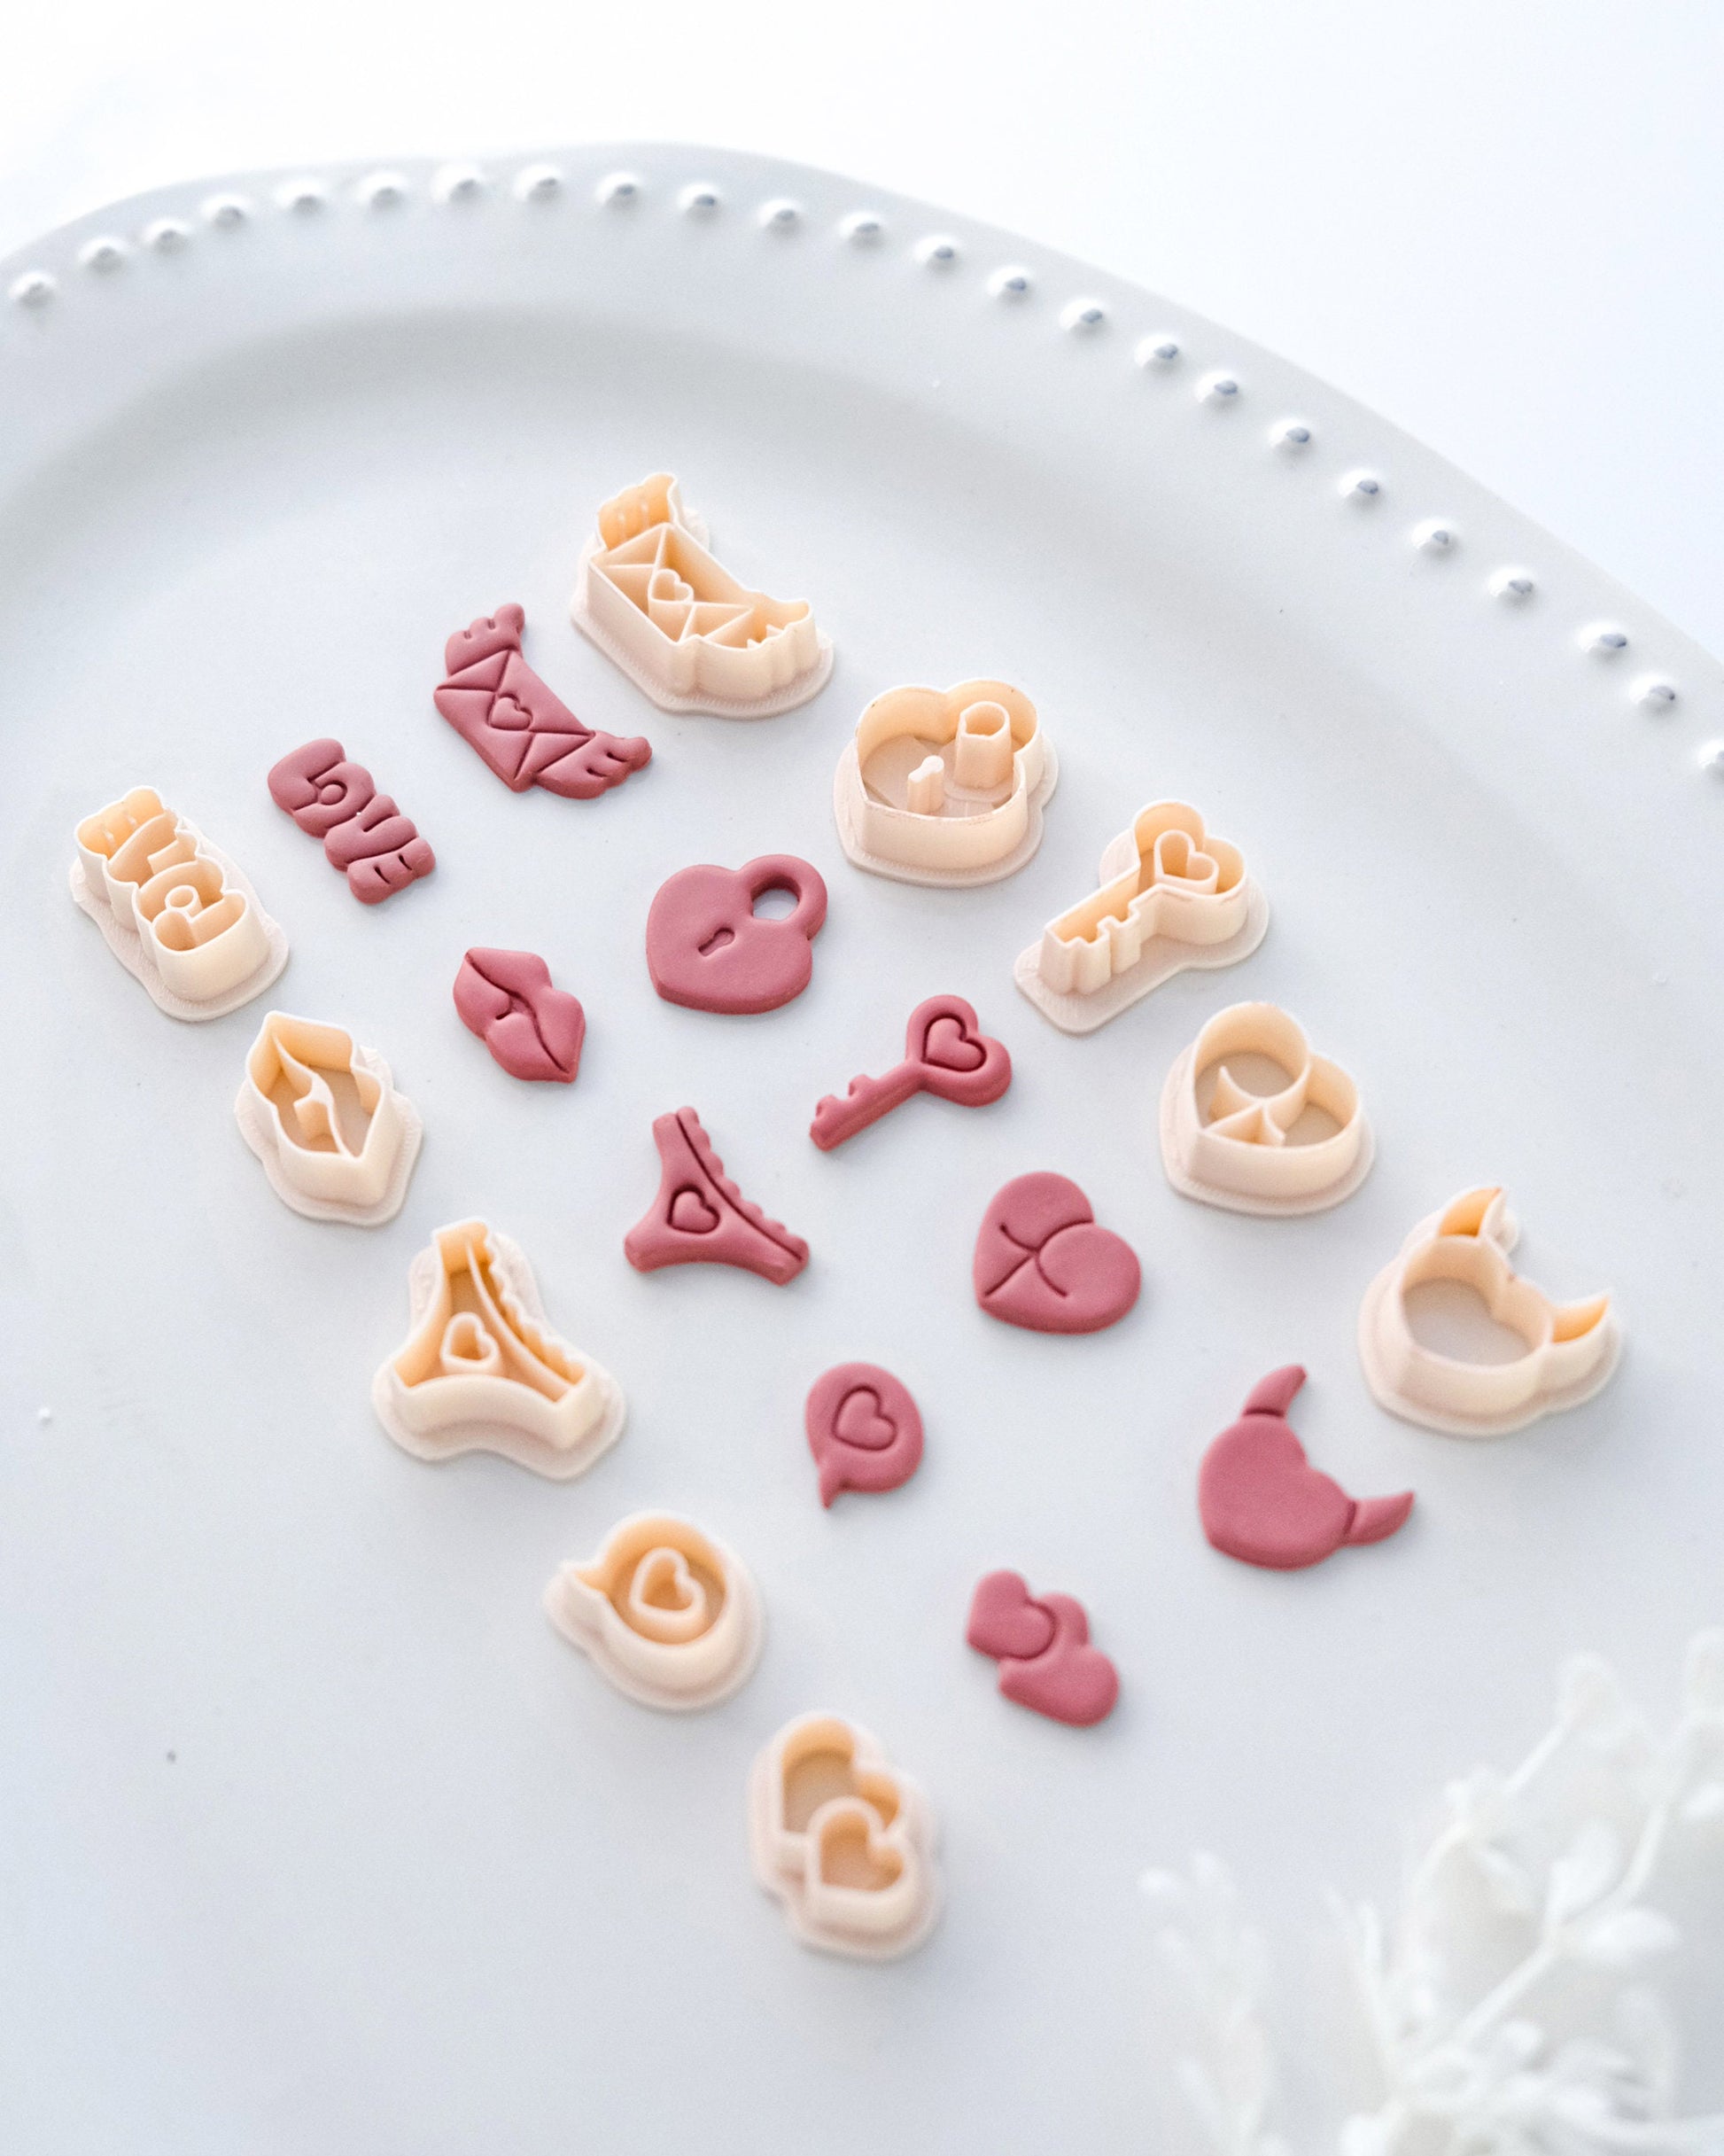 Two Heart Valentines Clay Cutters – RoseauxClayCo